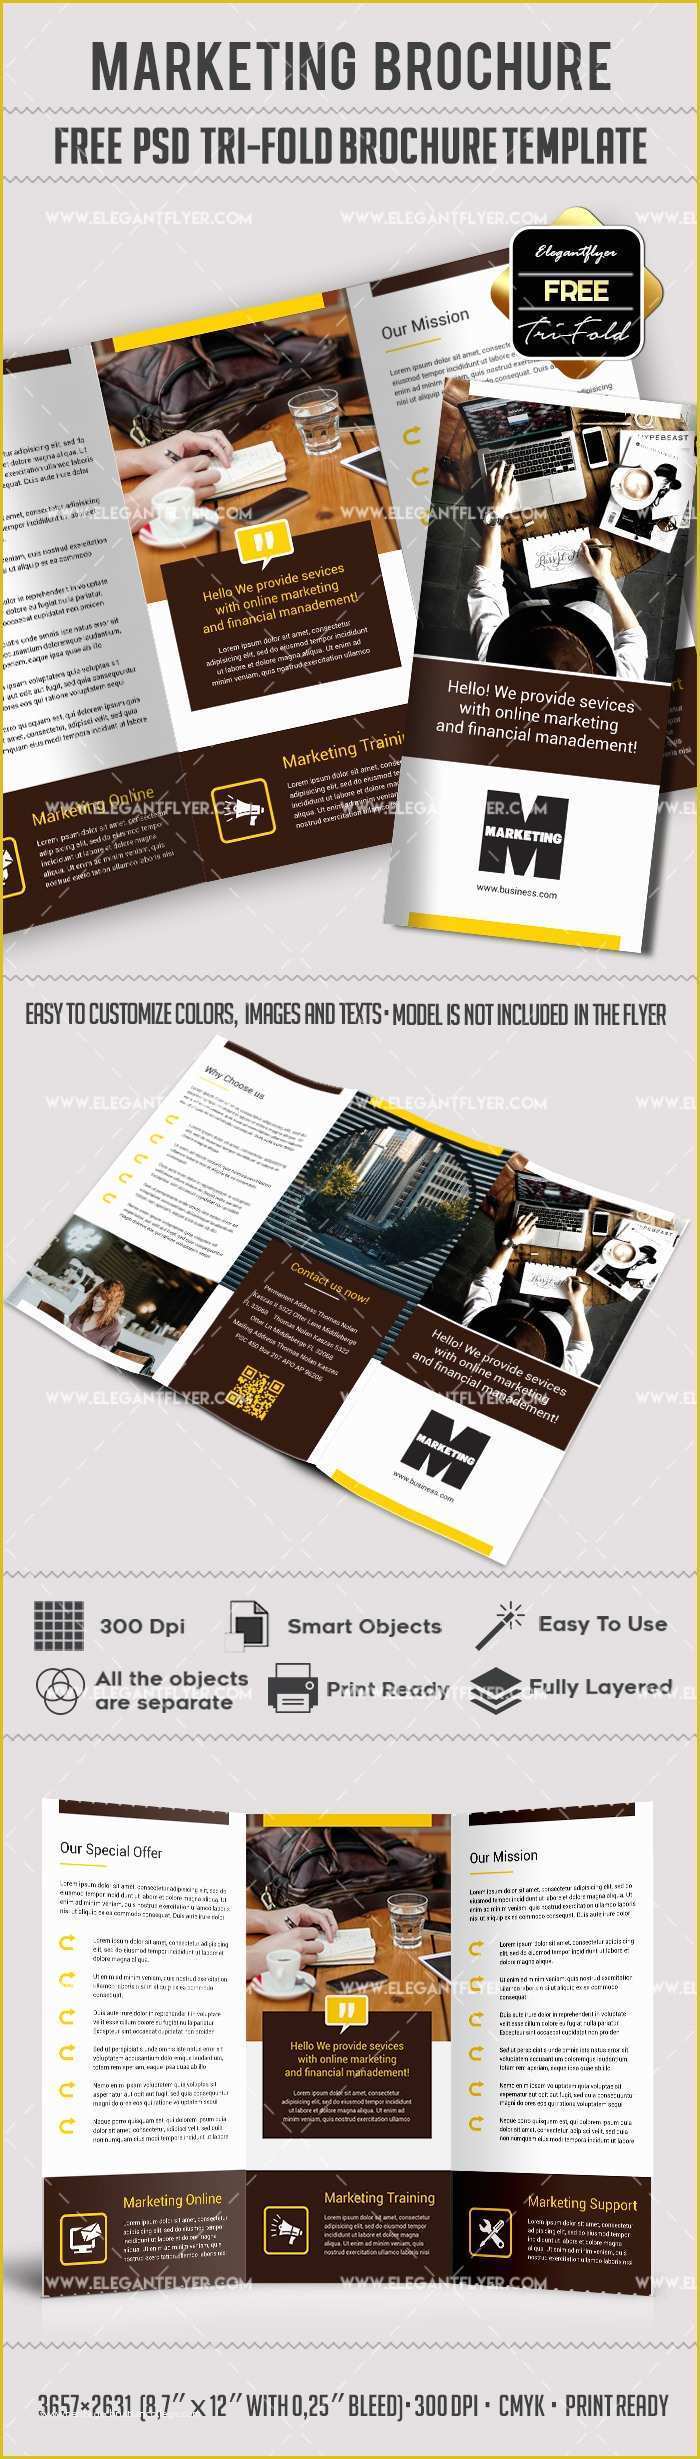 Free Flyer Brochure Templates Of Marketing – Free Tri Fold Psd Brochure Template – by